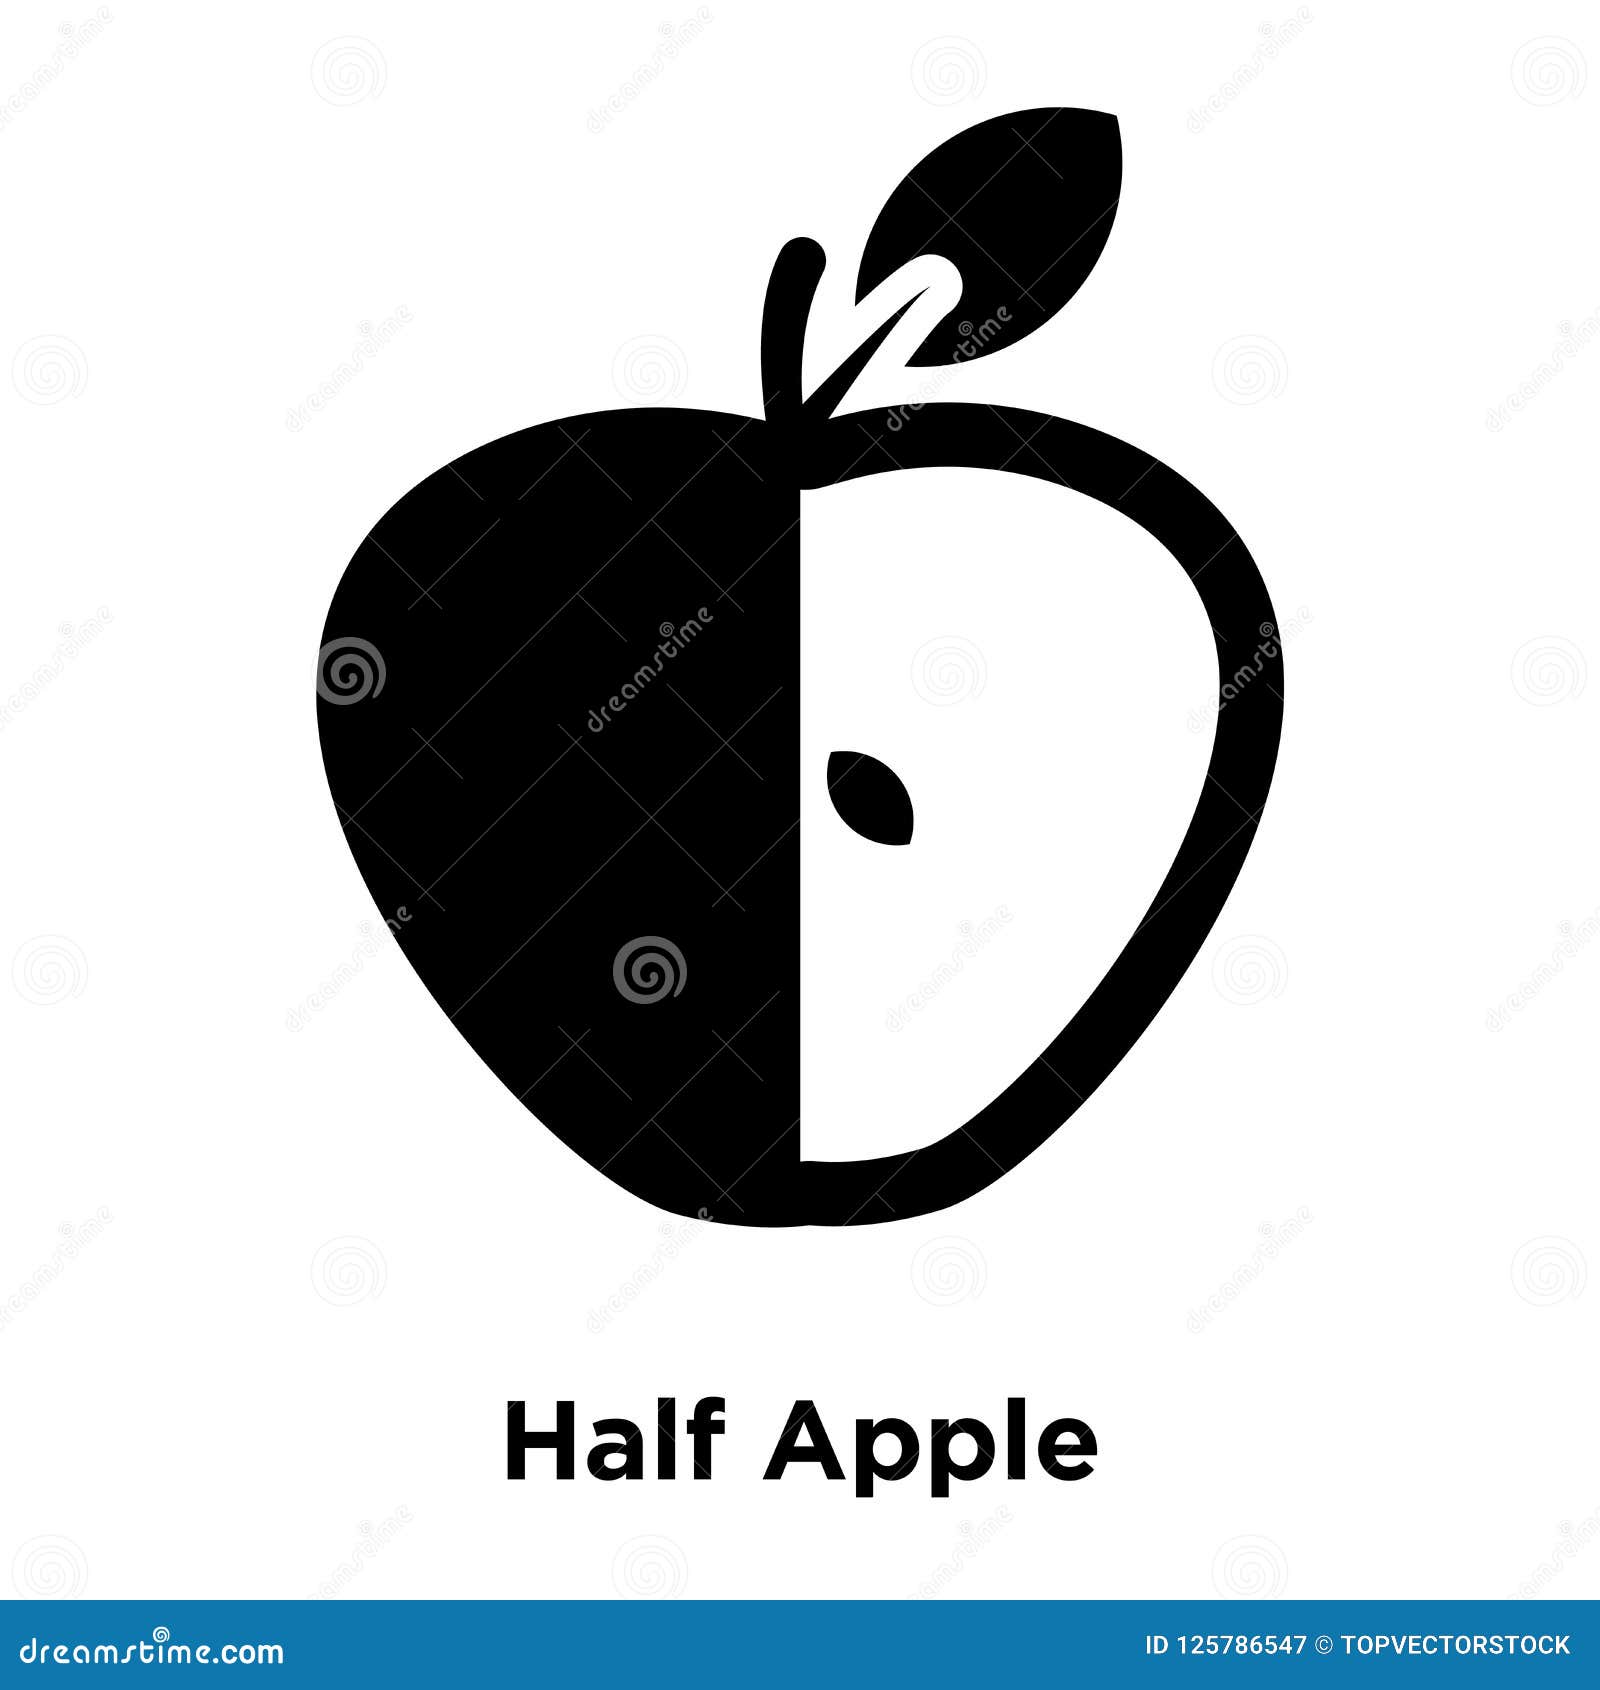 Half Apple Icon Vector Isolated On White Background Logo Concept Of Half Apple Sign On Transparent Background Black Filled Stock Vector Illustration Of Organic Design